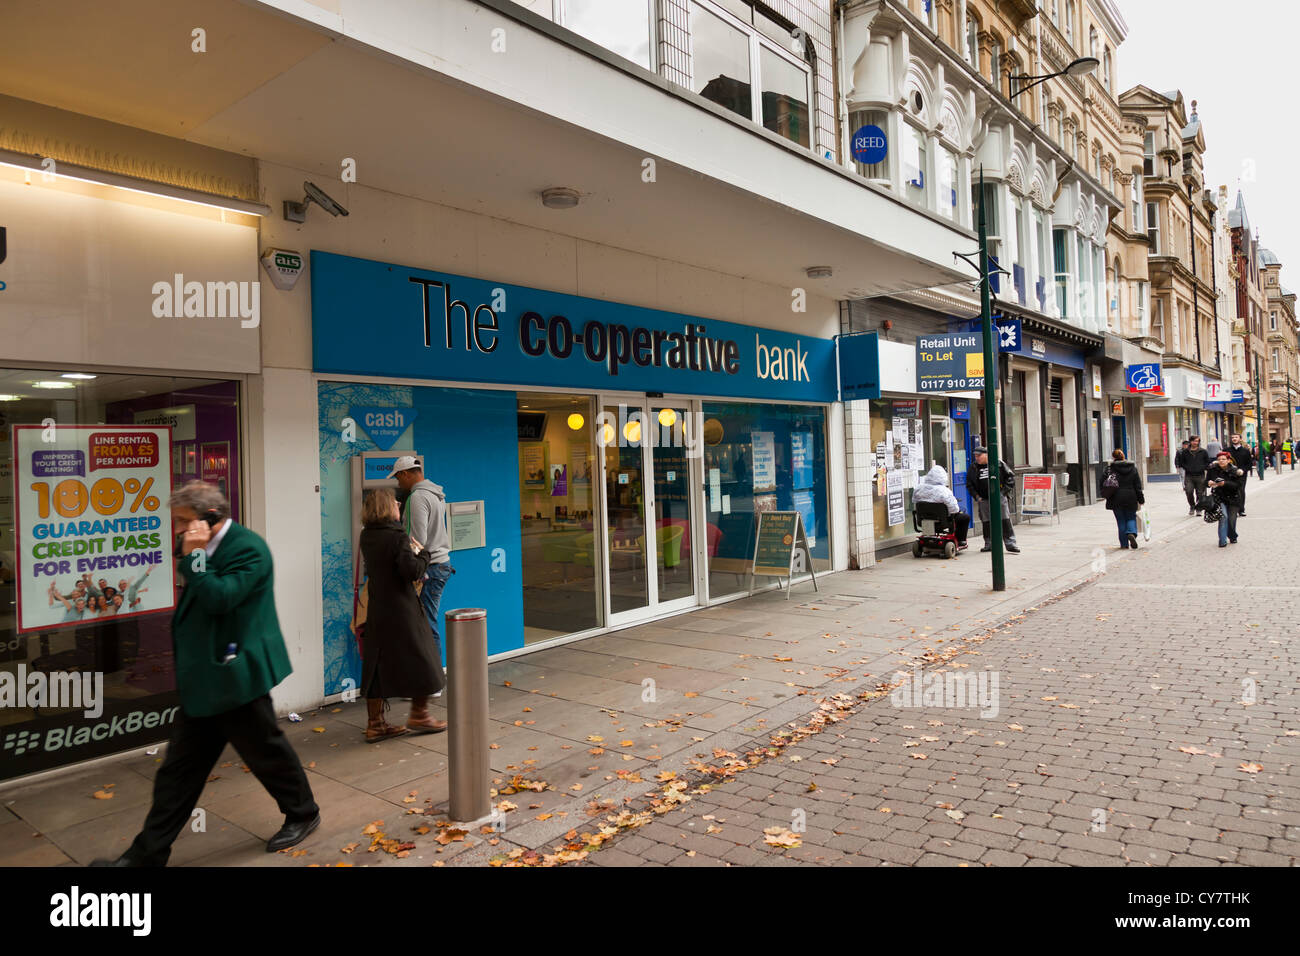 The Co-operative Bank on Commercial Street Newport Wales UK. Stock Photo